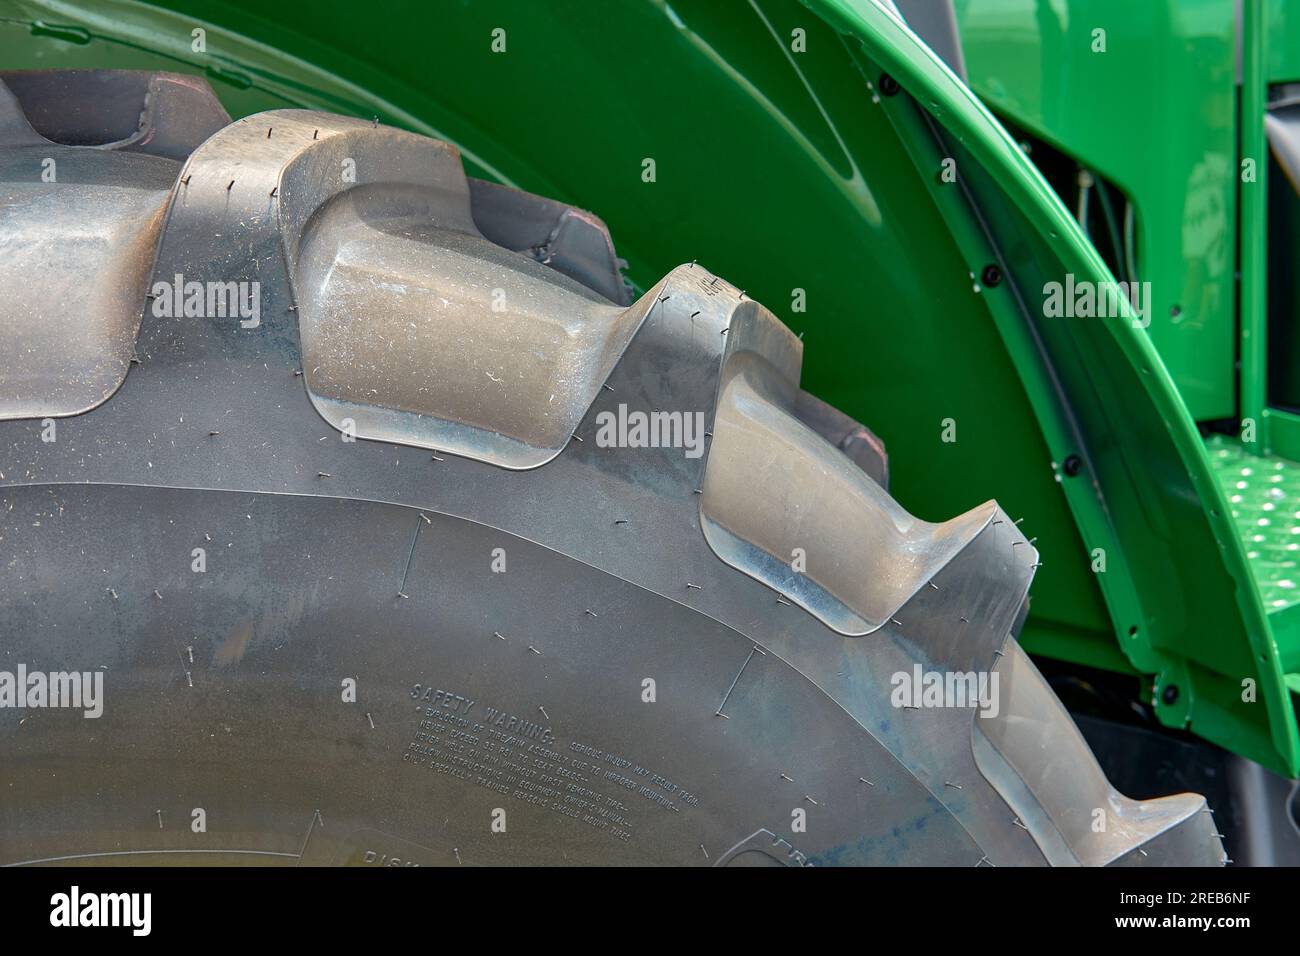 Closeup of a tractor tire tread against a green fender at the Delaware State Fair, Harrington, Delaware USA. Stock Photo